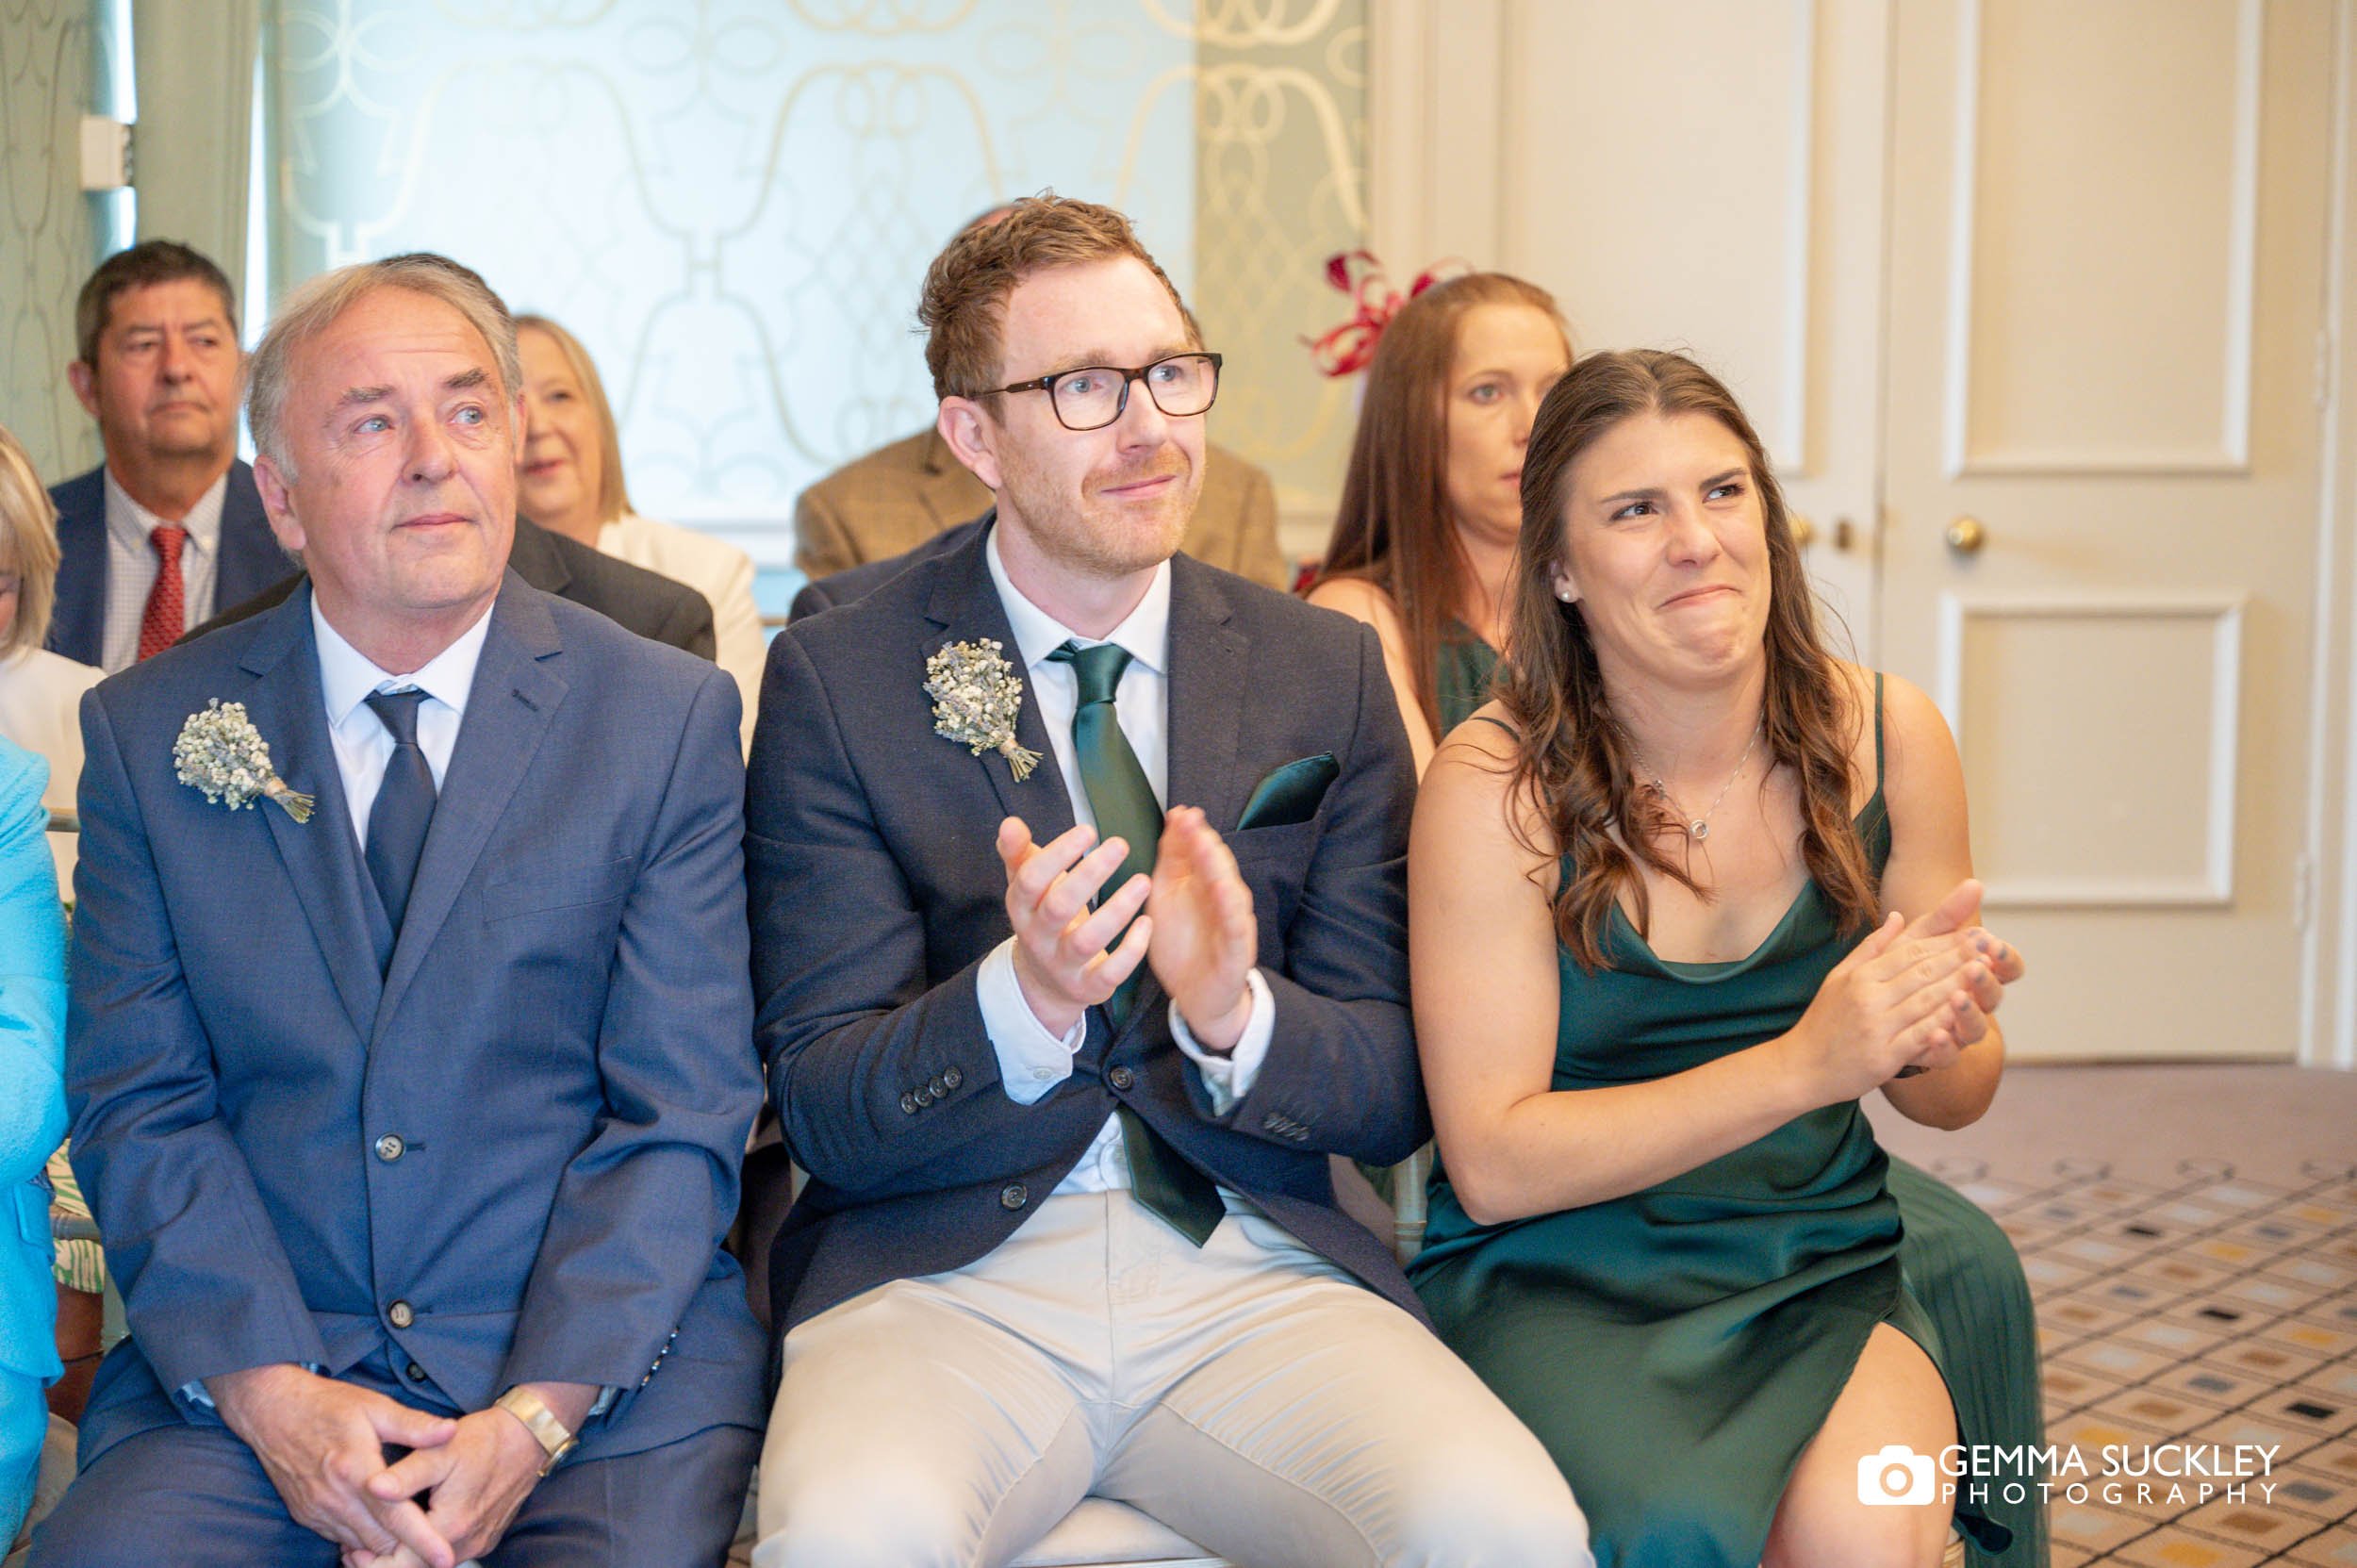 wedding guests clapping after bride and groom are wed